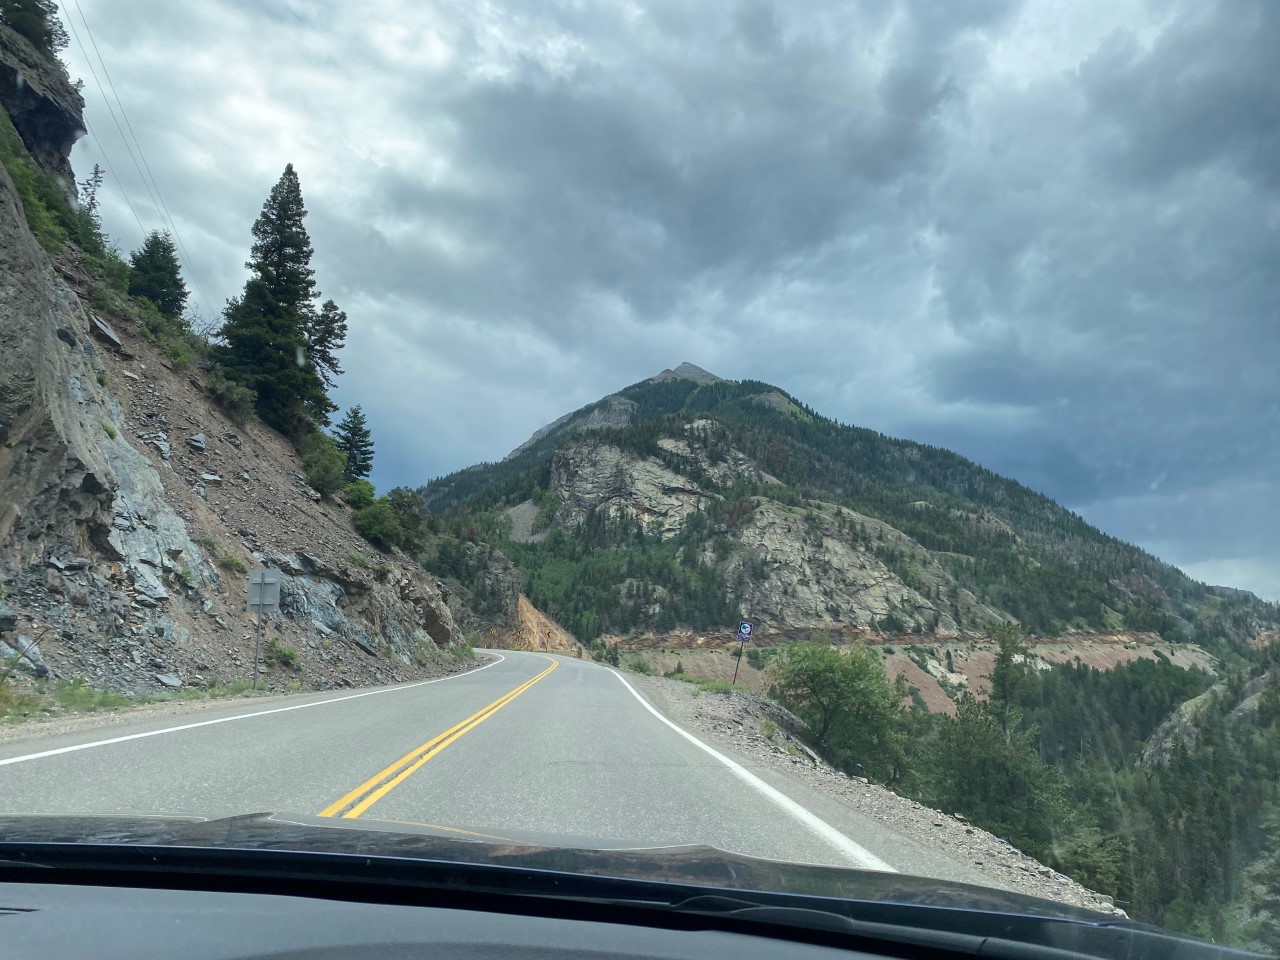 Storm clouds are gathering as we leave Ouray.